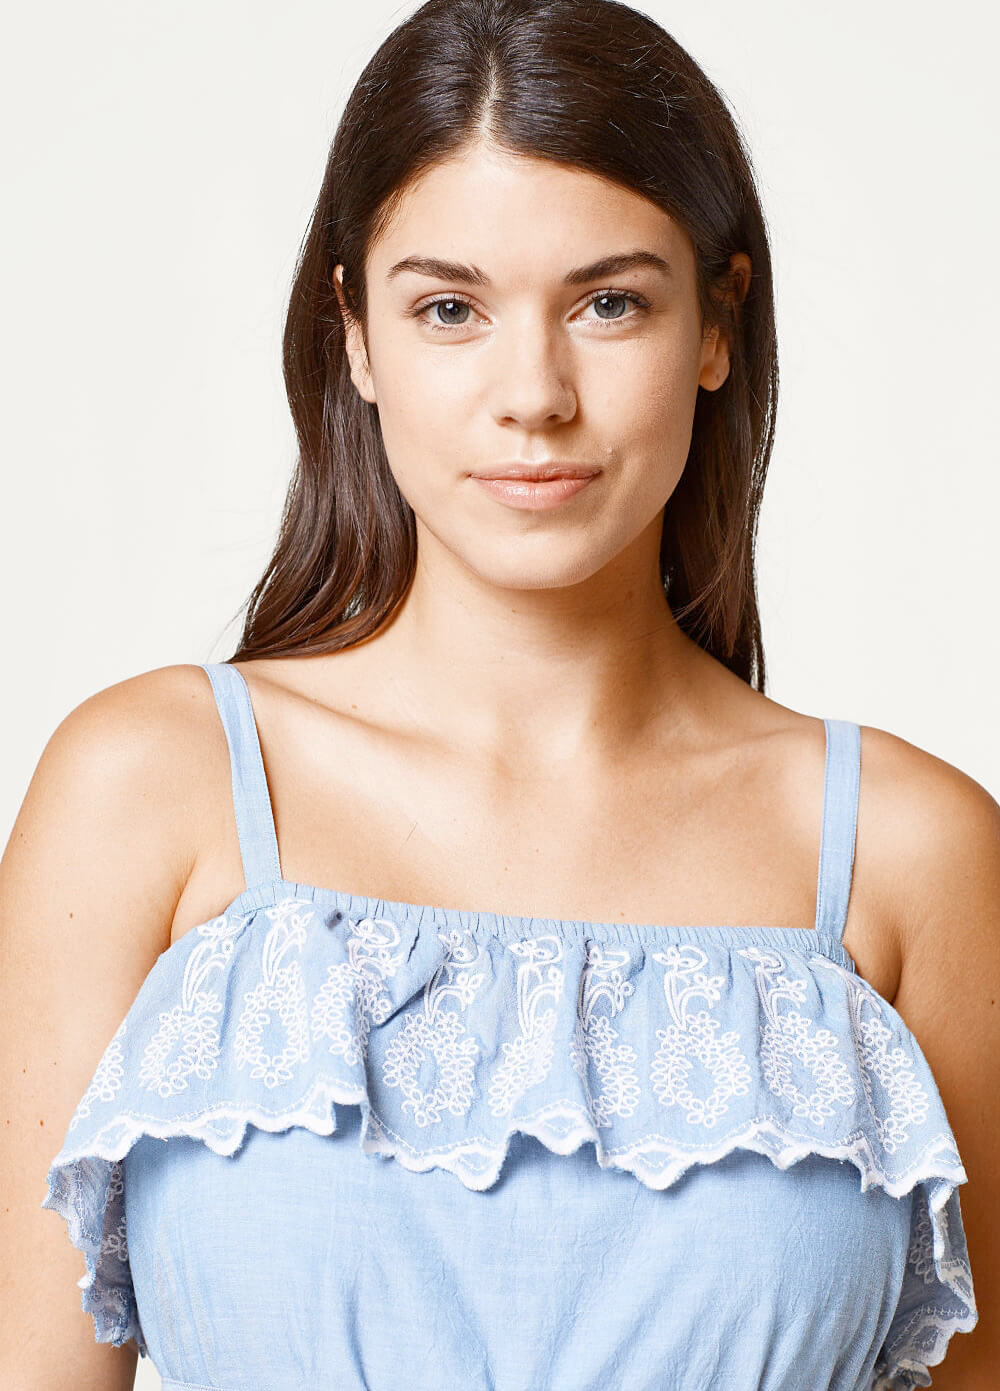 Embroidered Ruffle Maternity Dress in Blue by Esprit